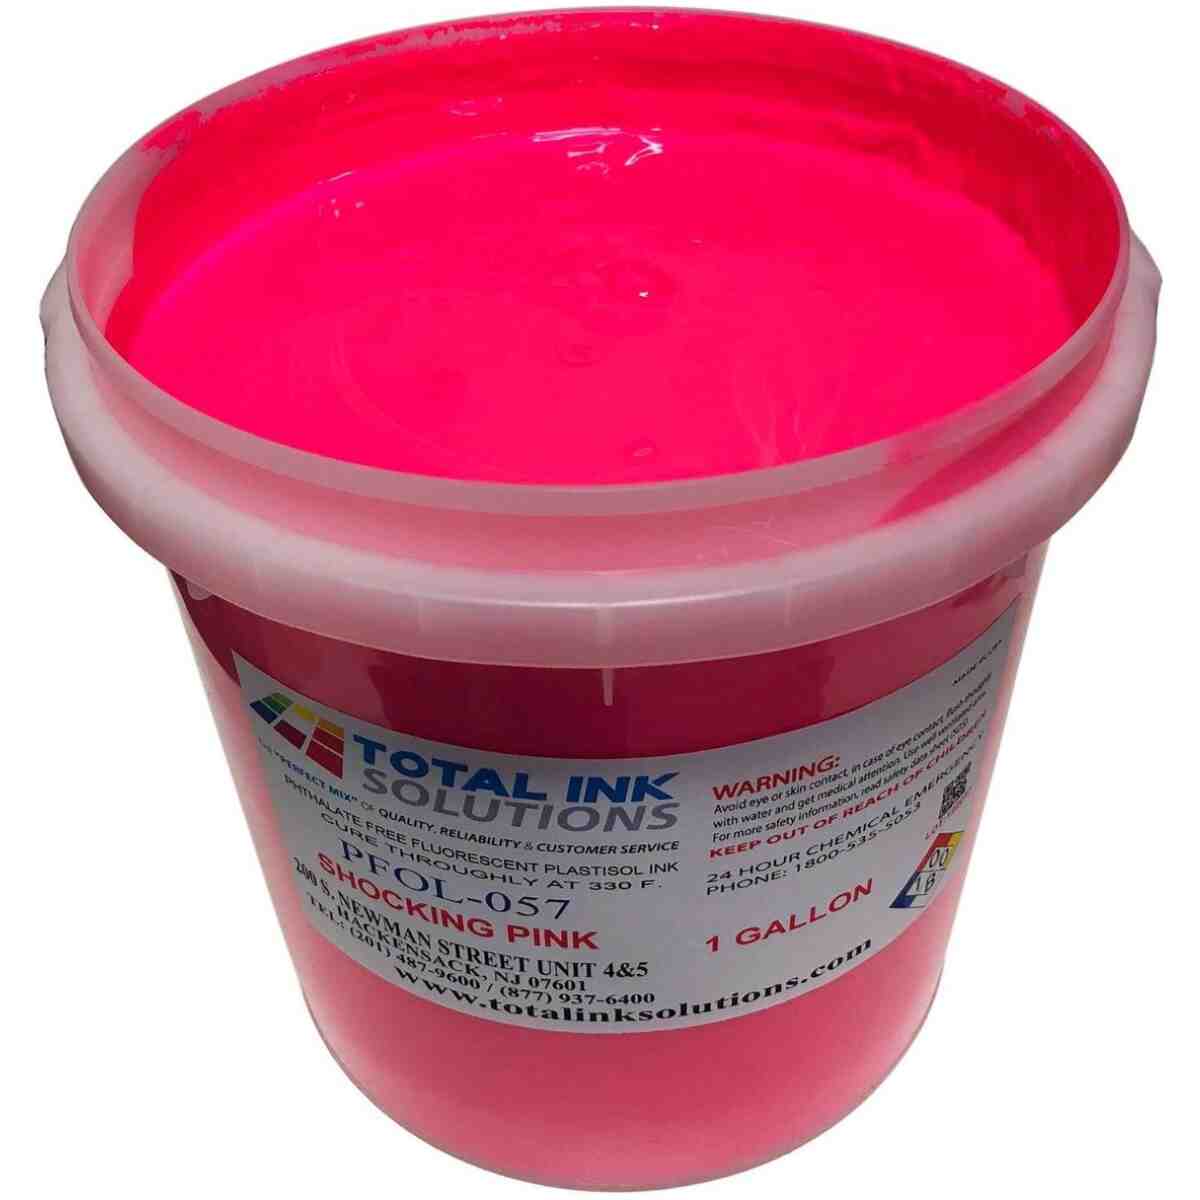 Waterbase Fluorescent - Shocking Pink TOTAL INK SOLUTIONS®